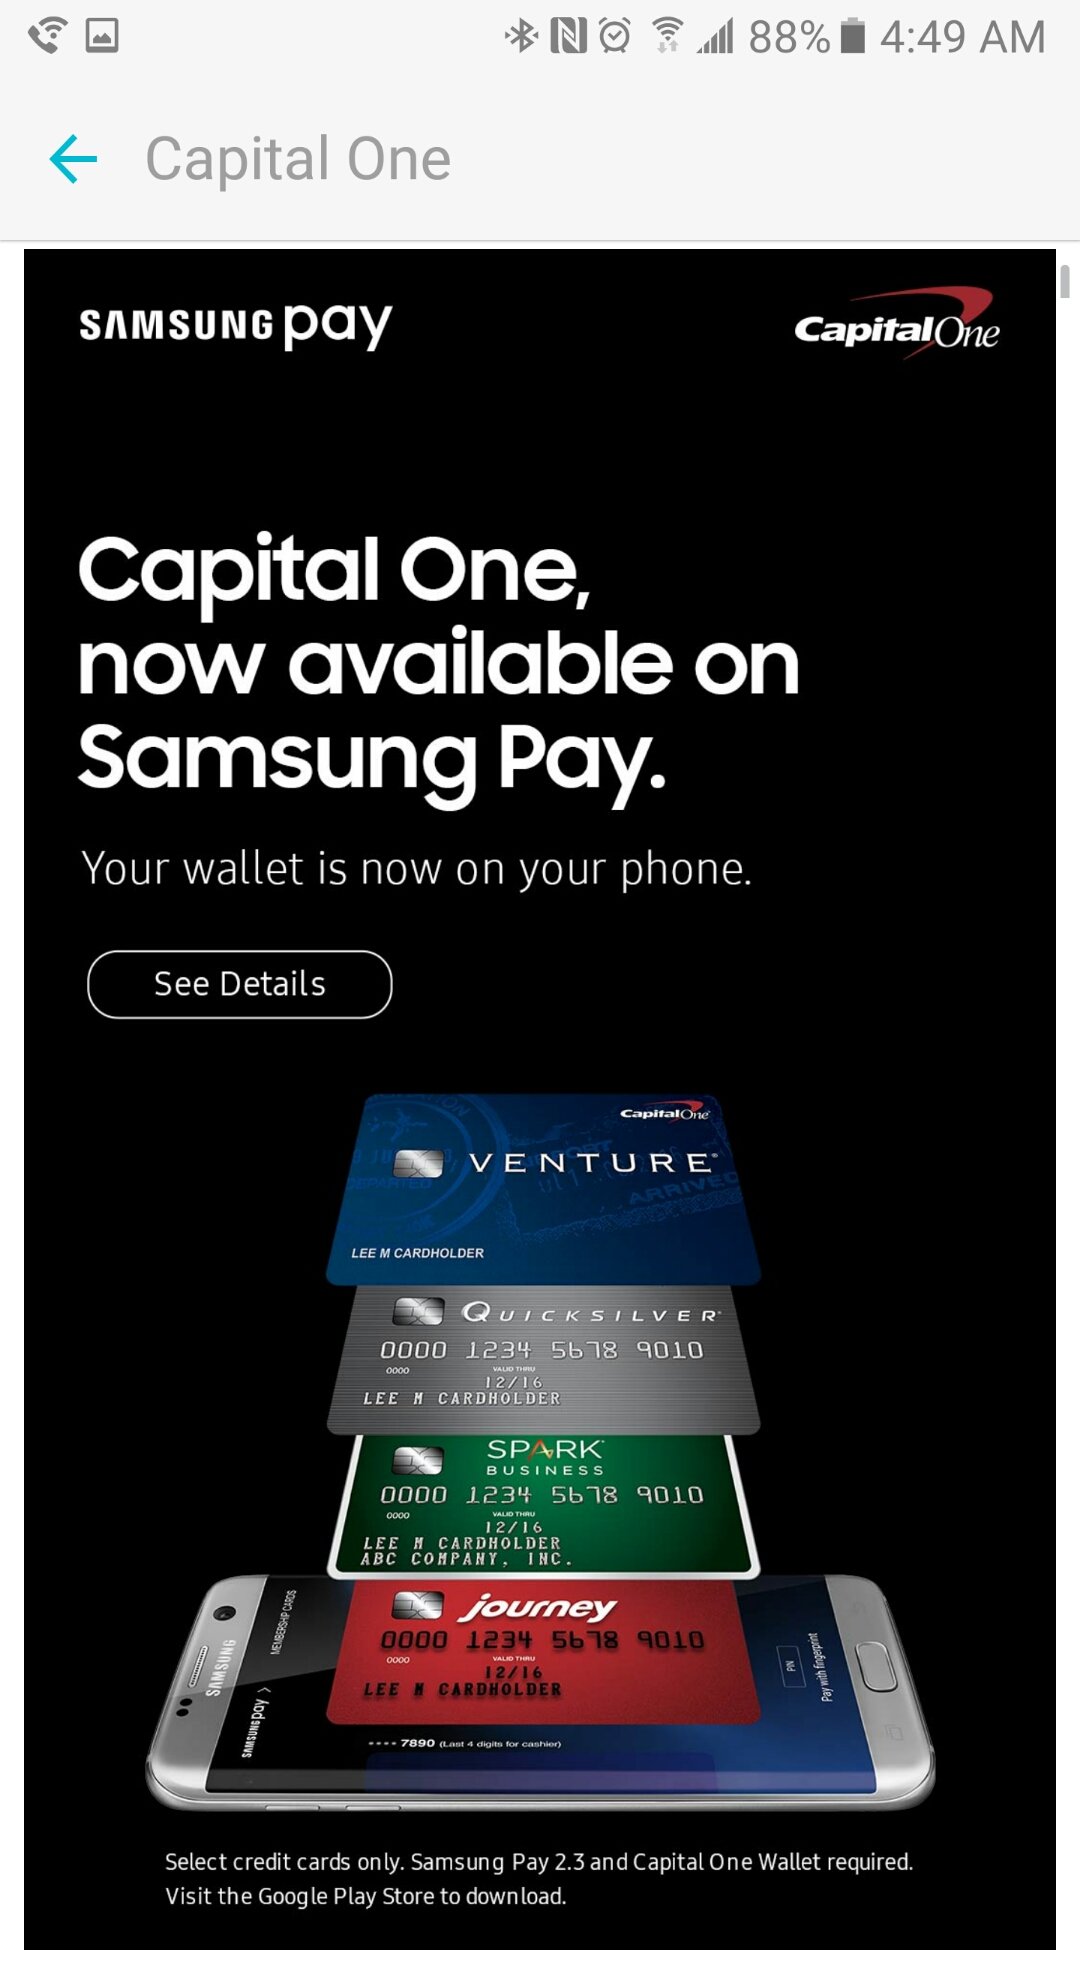 Capital One's Platinum credit card now works with Samsung Pay